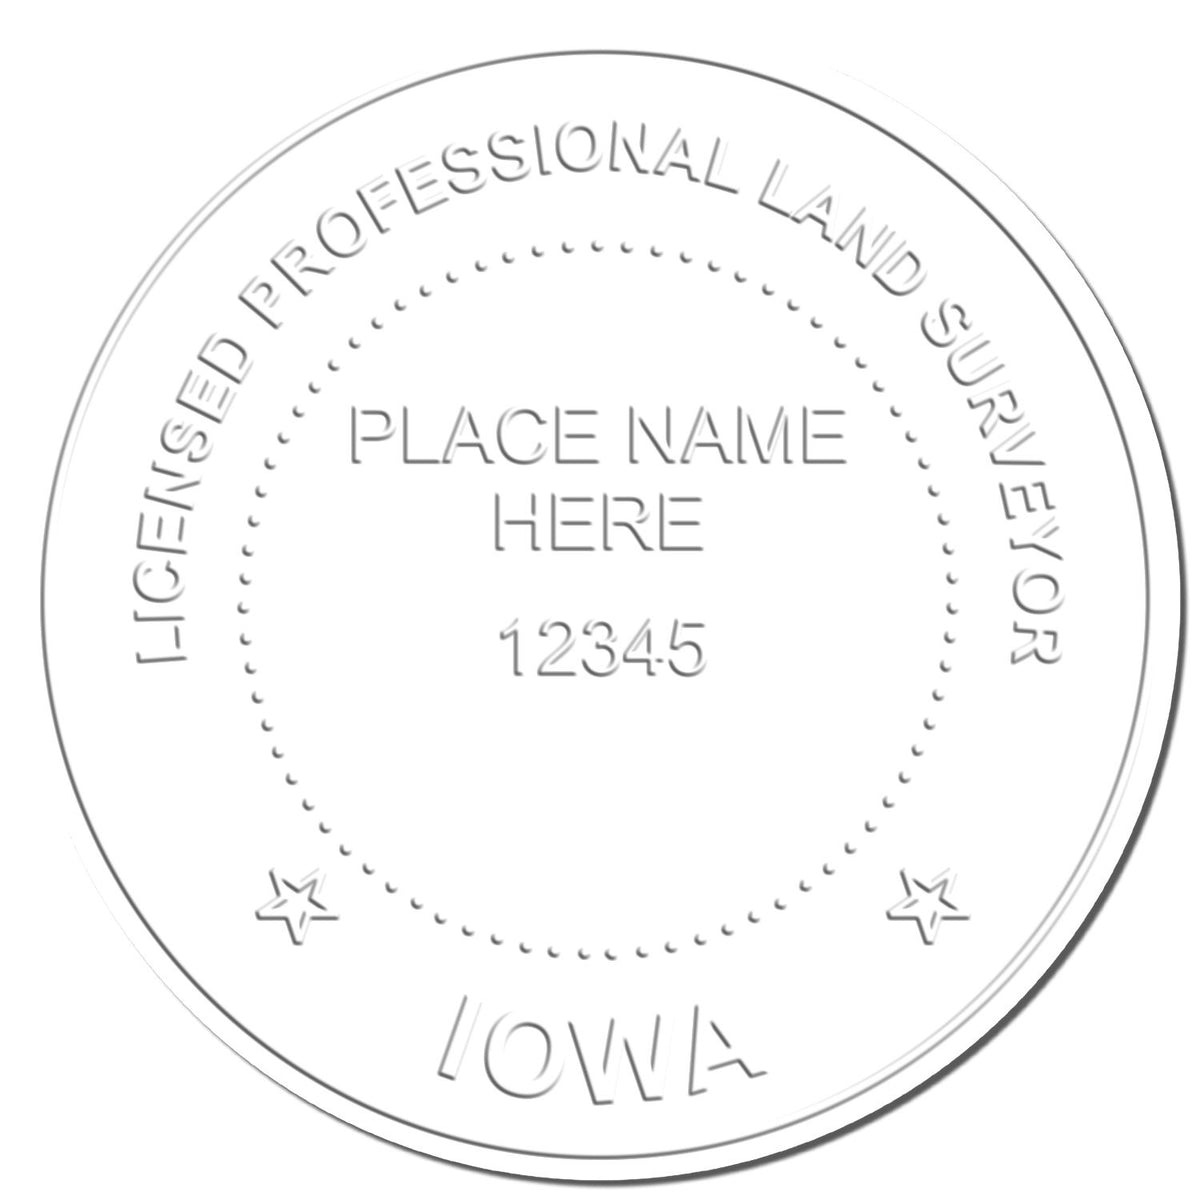 This paper is stamped with a sample imprint of the State of Iowa Soft Land Surveyor Embossing Seal, signifying its quality and reliability.